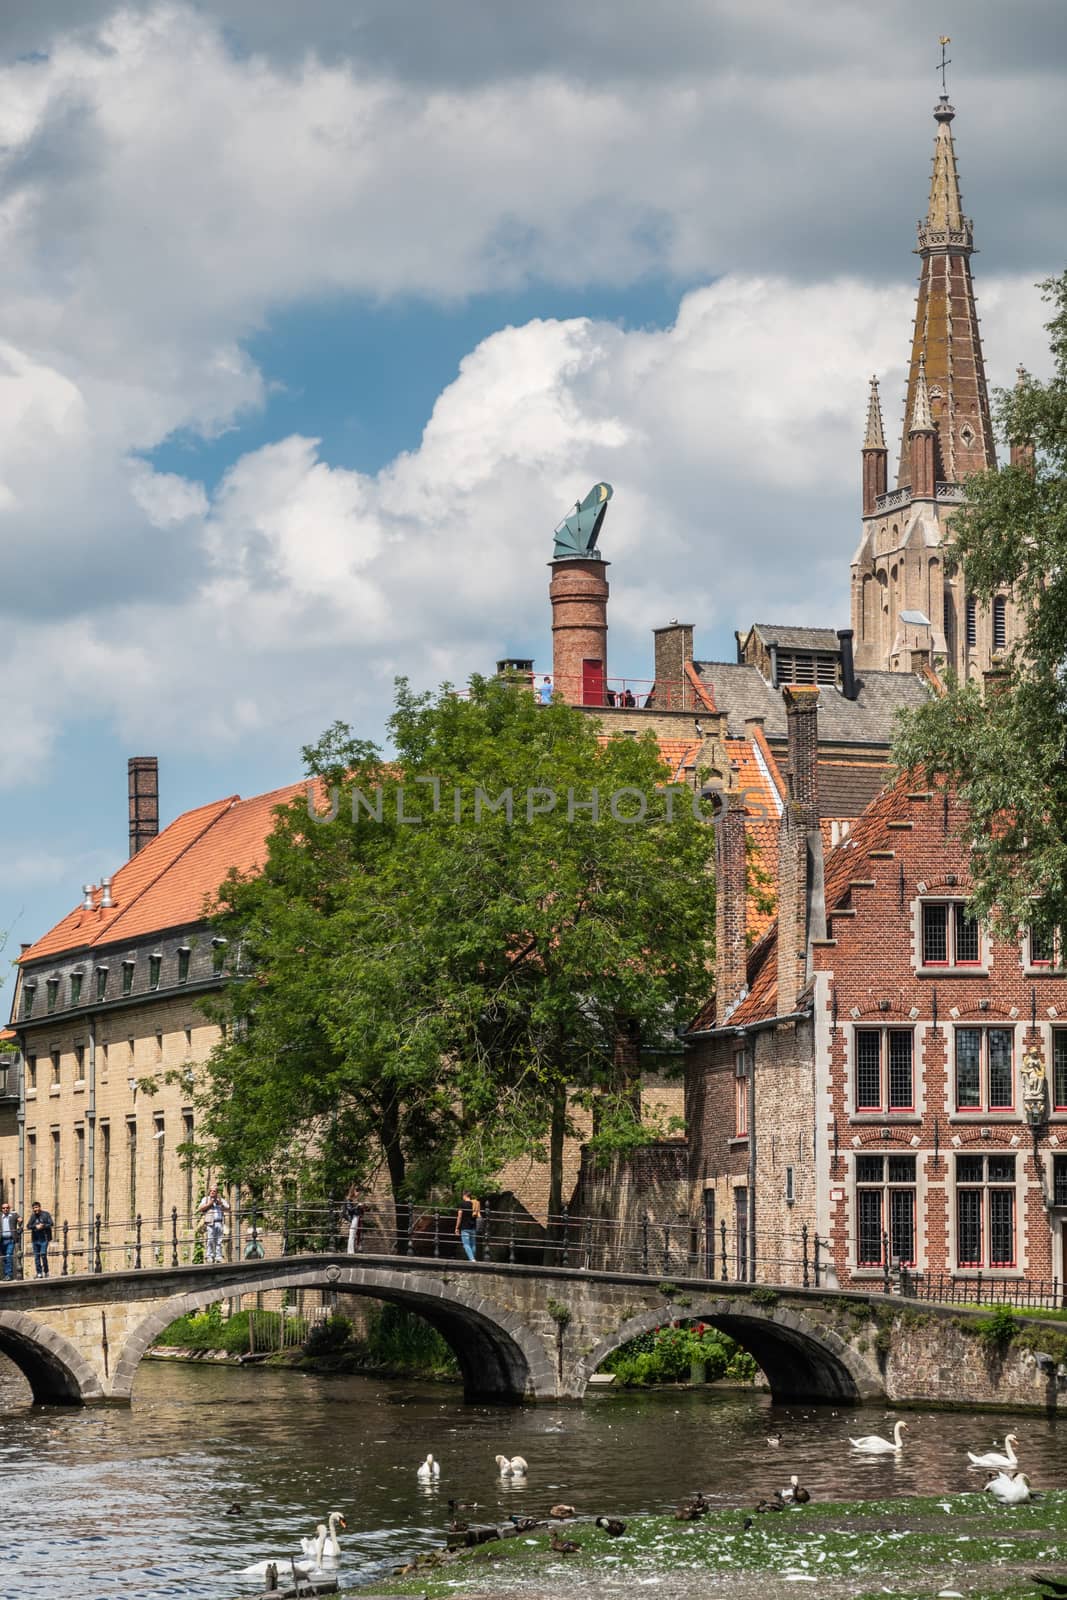 Bruges, Flanders, Belgium -  June 17, 2019: Bridge over canal with swans to beguinage with brewery building and chimneys in back, plus spire of Notre Dame Cathedral, all under cloudscape.